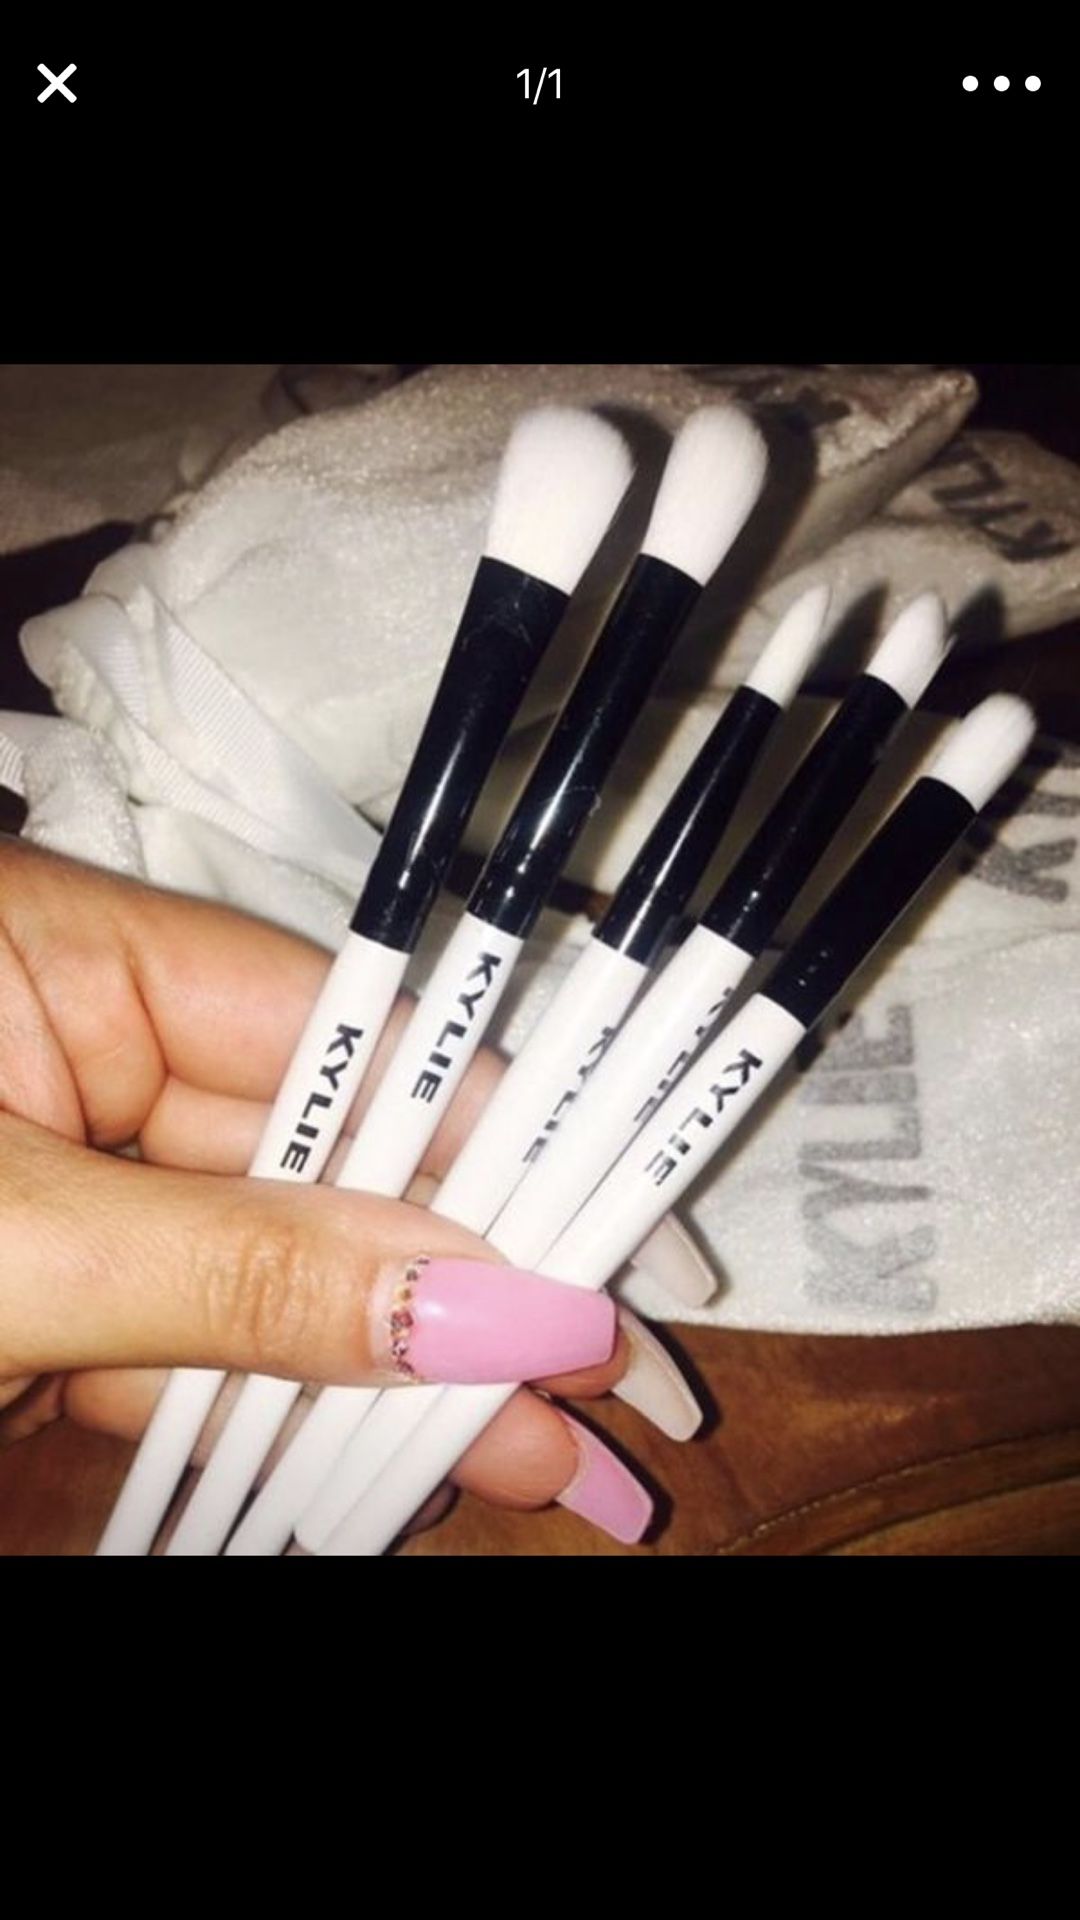 Kylie makeup brushes